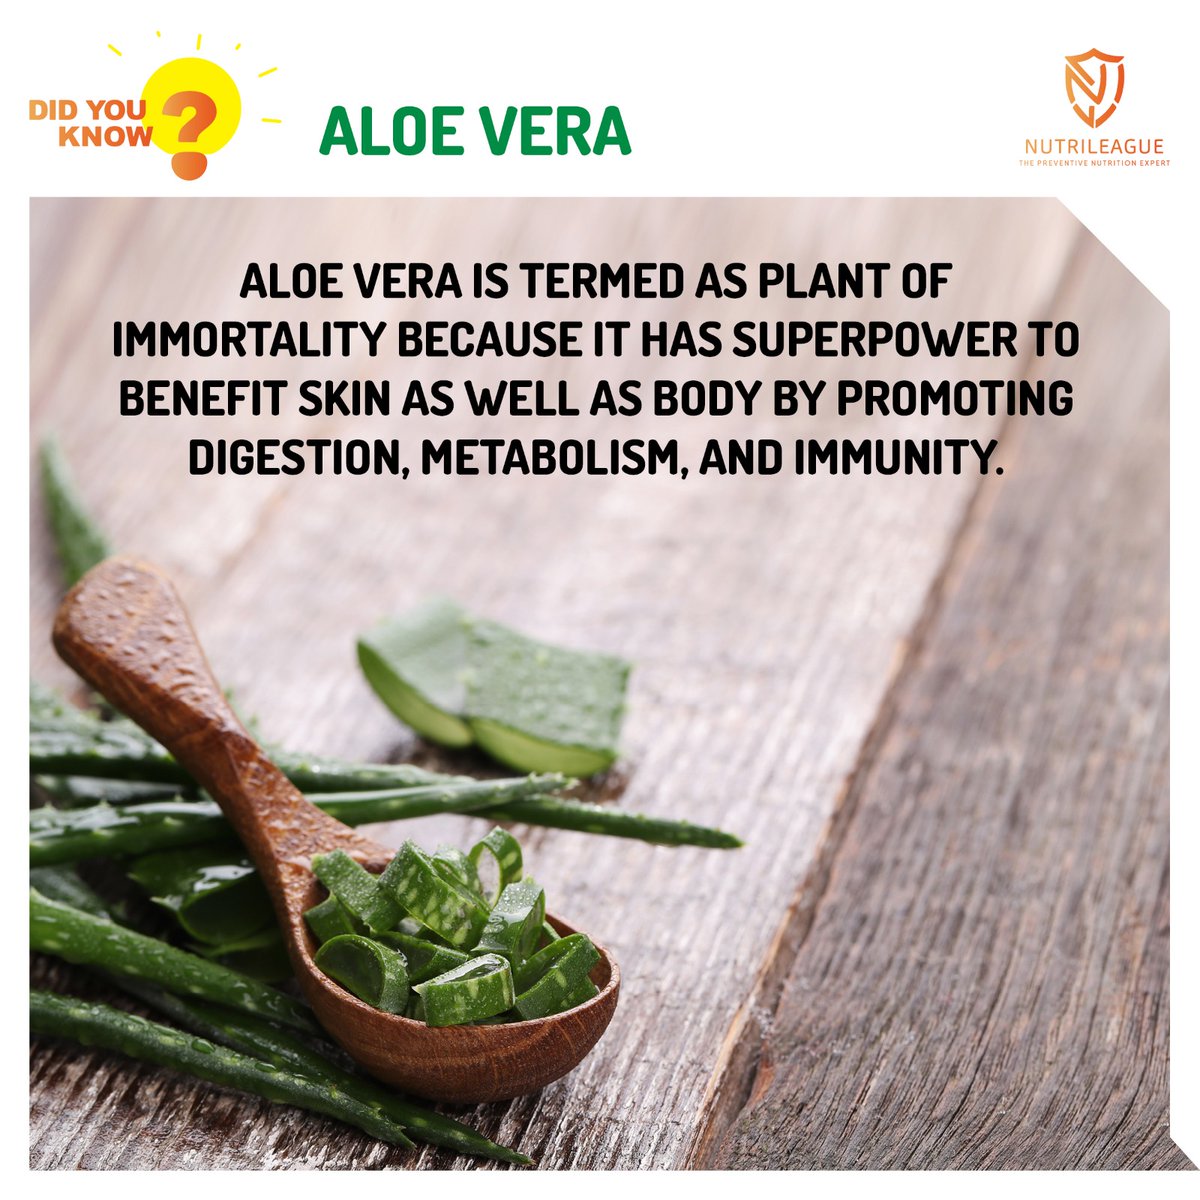 DID YOU KNOW?

Aloe Vera is termed a plant of immortality because it has superpower to benefit skin as well as body by promoting digestion, metabolism, and immunity.
.
.
.
#aloevera #aloeveragel #healthyhair #hairhealth #skinhealth #healthyskin #bloodsugarcontrol #nutrileague